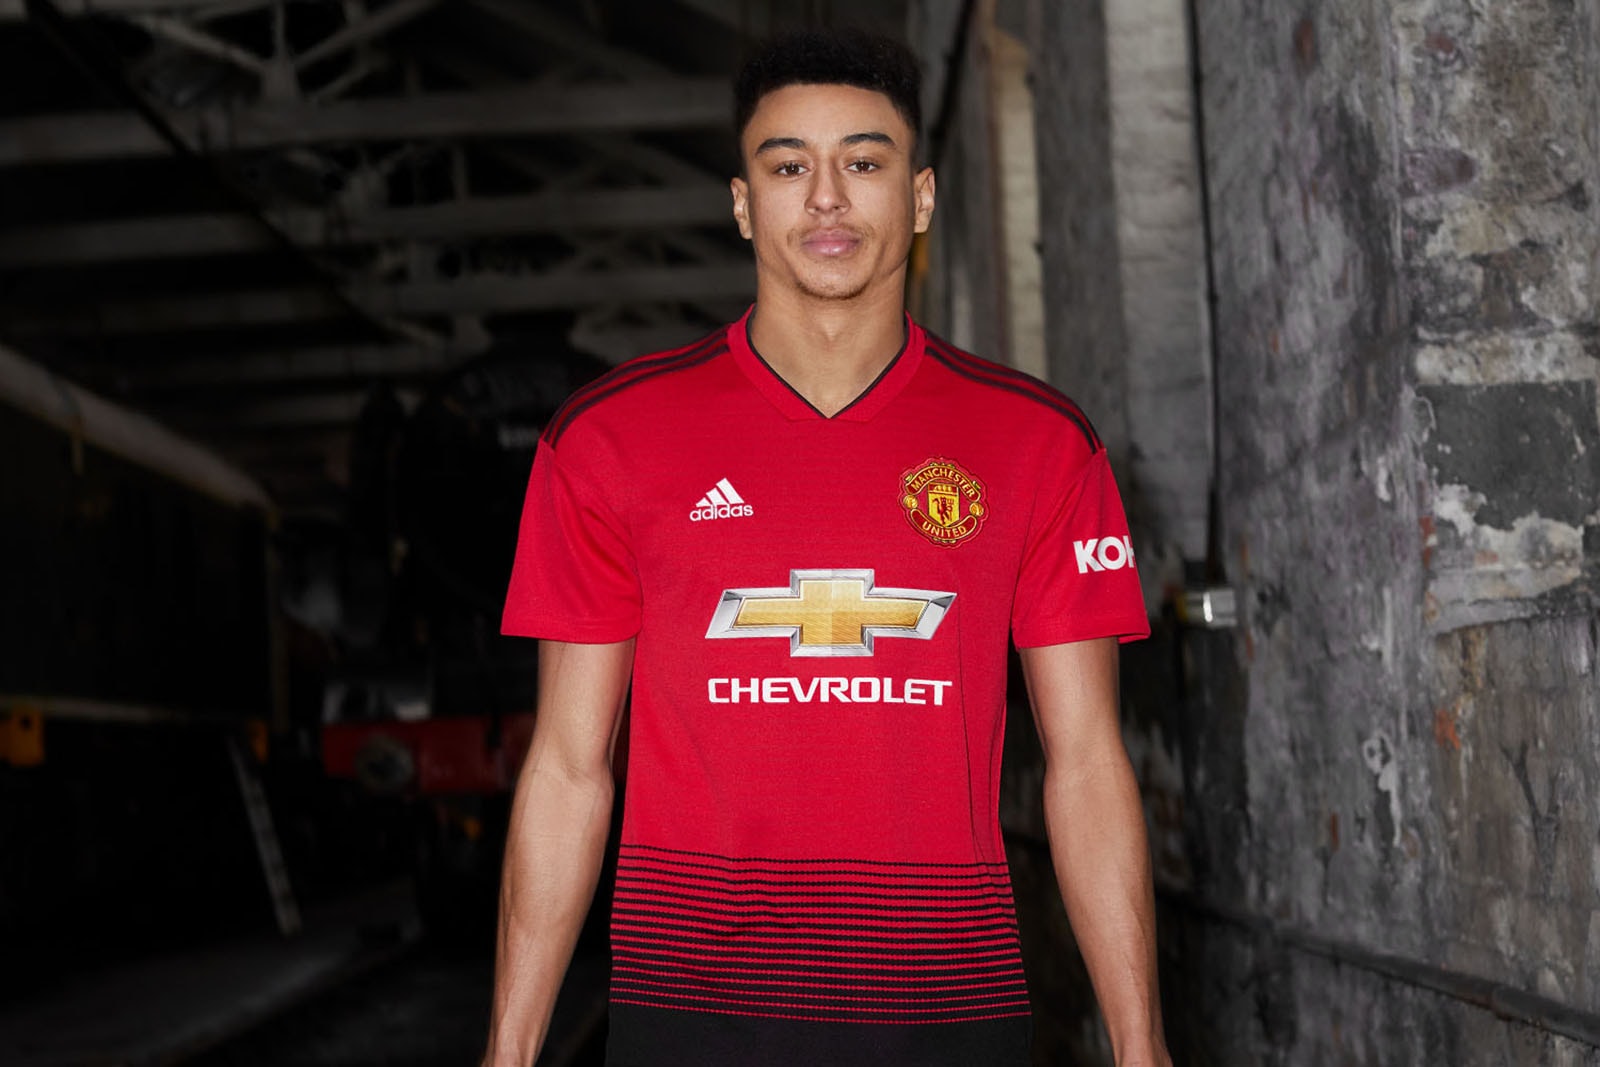 adidas Football Manchester United 2018/19 Home Kit Kits Jersey Shorts Socks Train Track Line Graphic 140th Anniversary Available Purchase Buy Cop Now Today